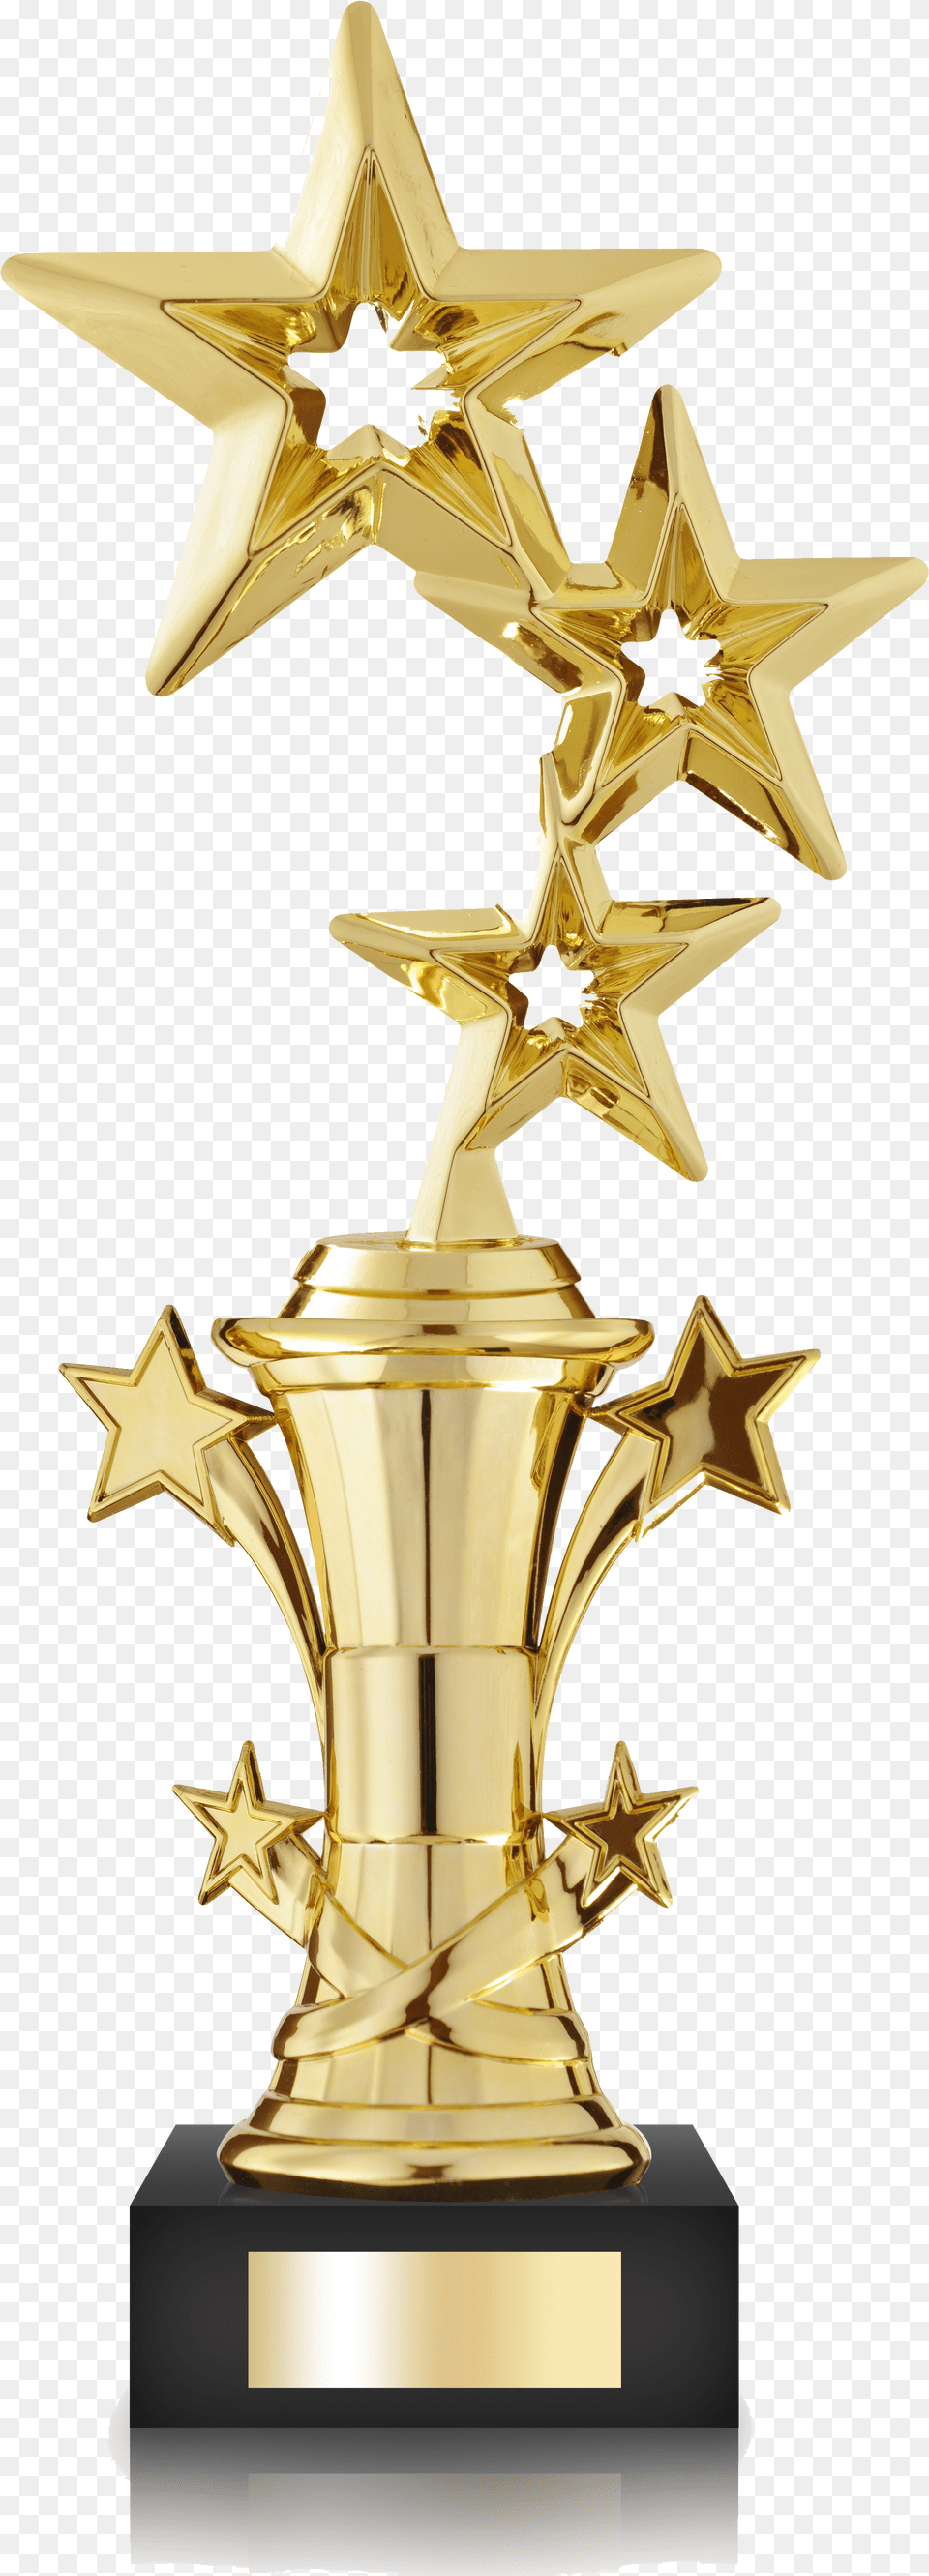 Star Trophy Picture Transparent Background Trophy Free Png